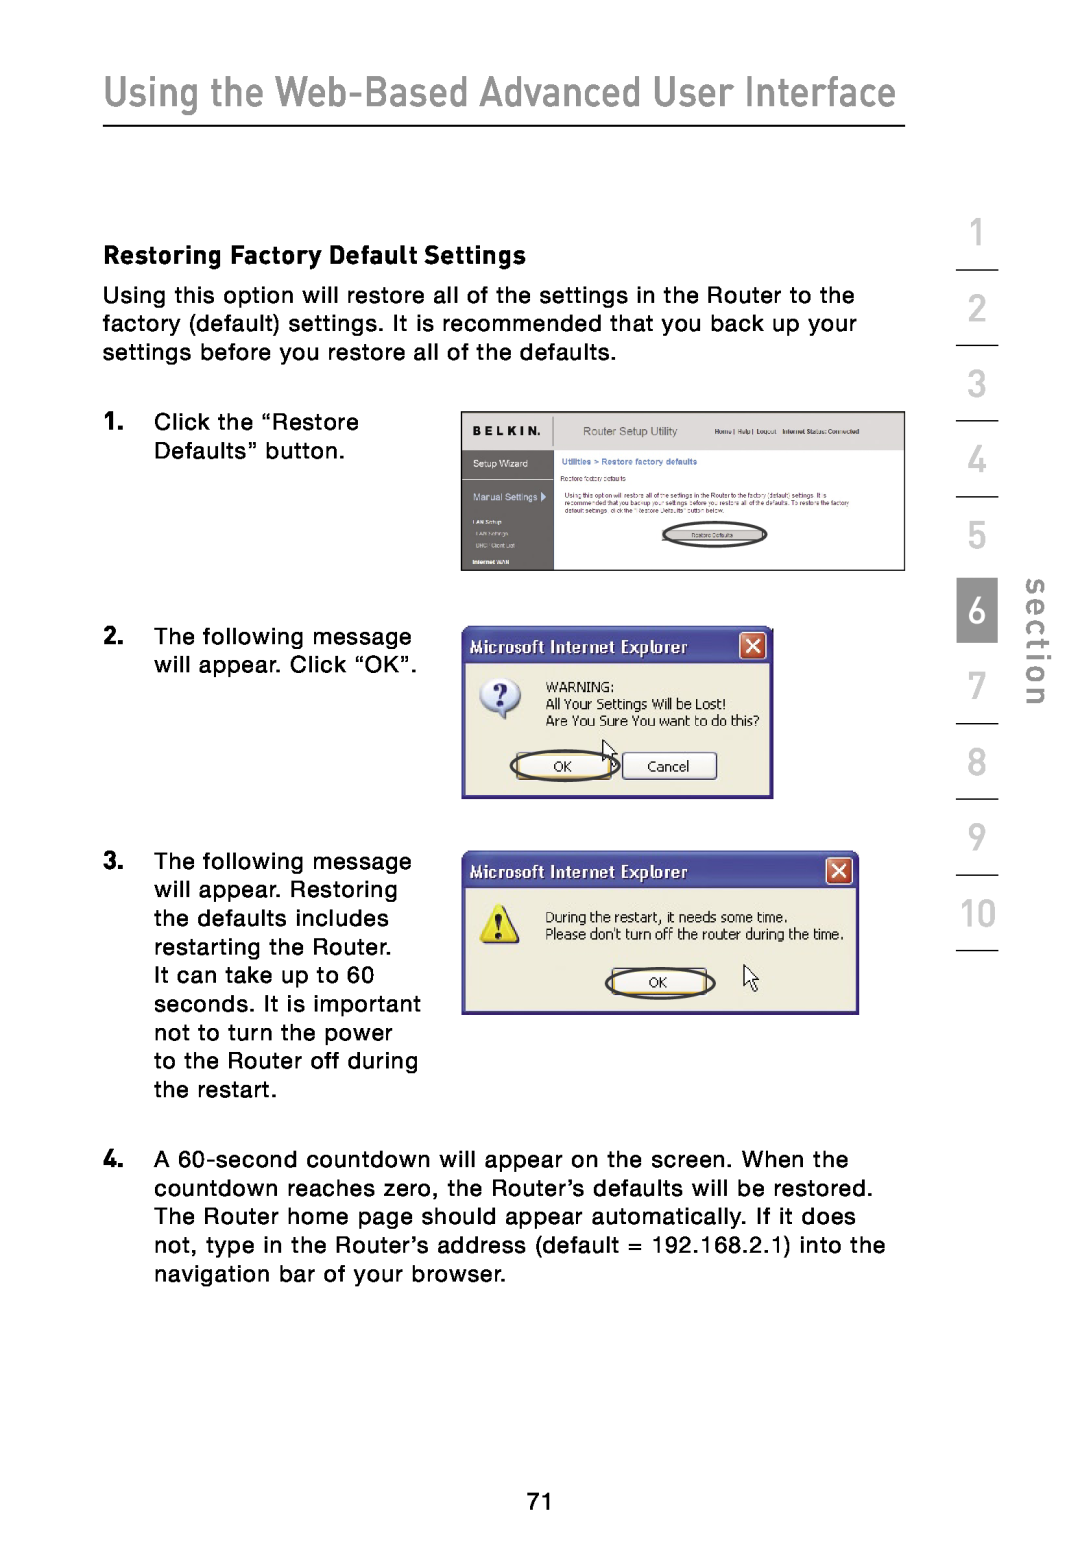 Belkin N1 user manual Restoring Factory Default Settings, Using the Web-Based Advanced User Interface, section 